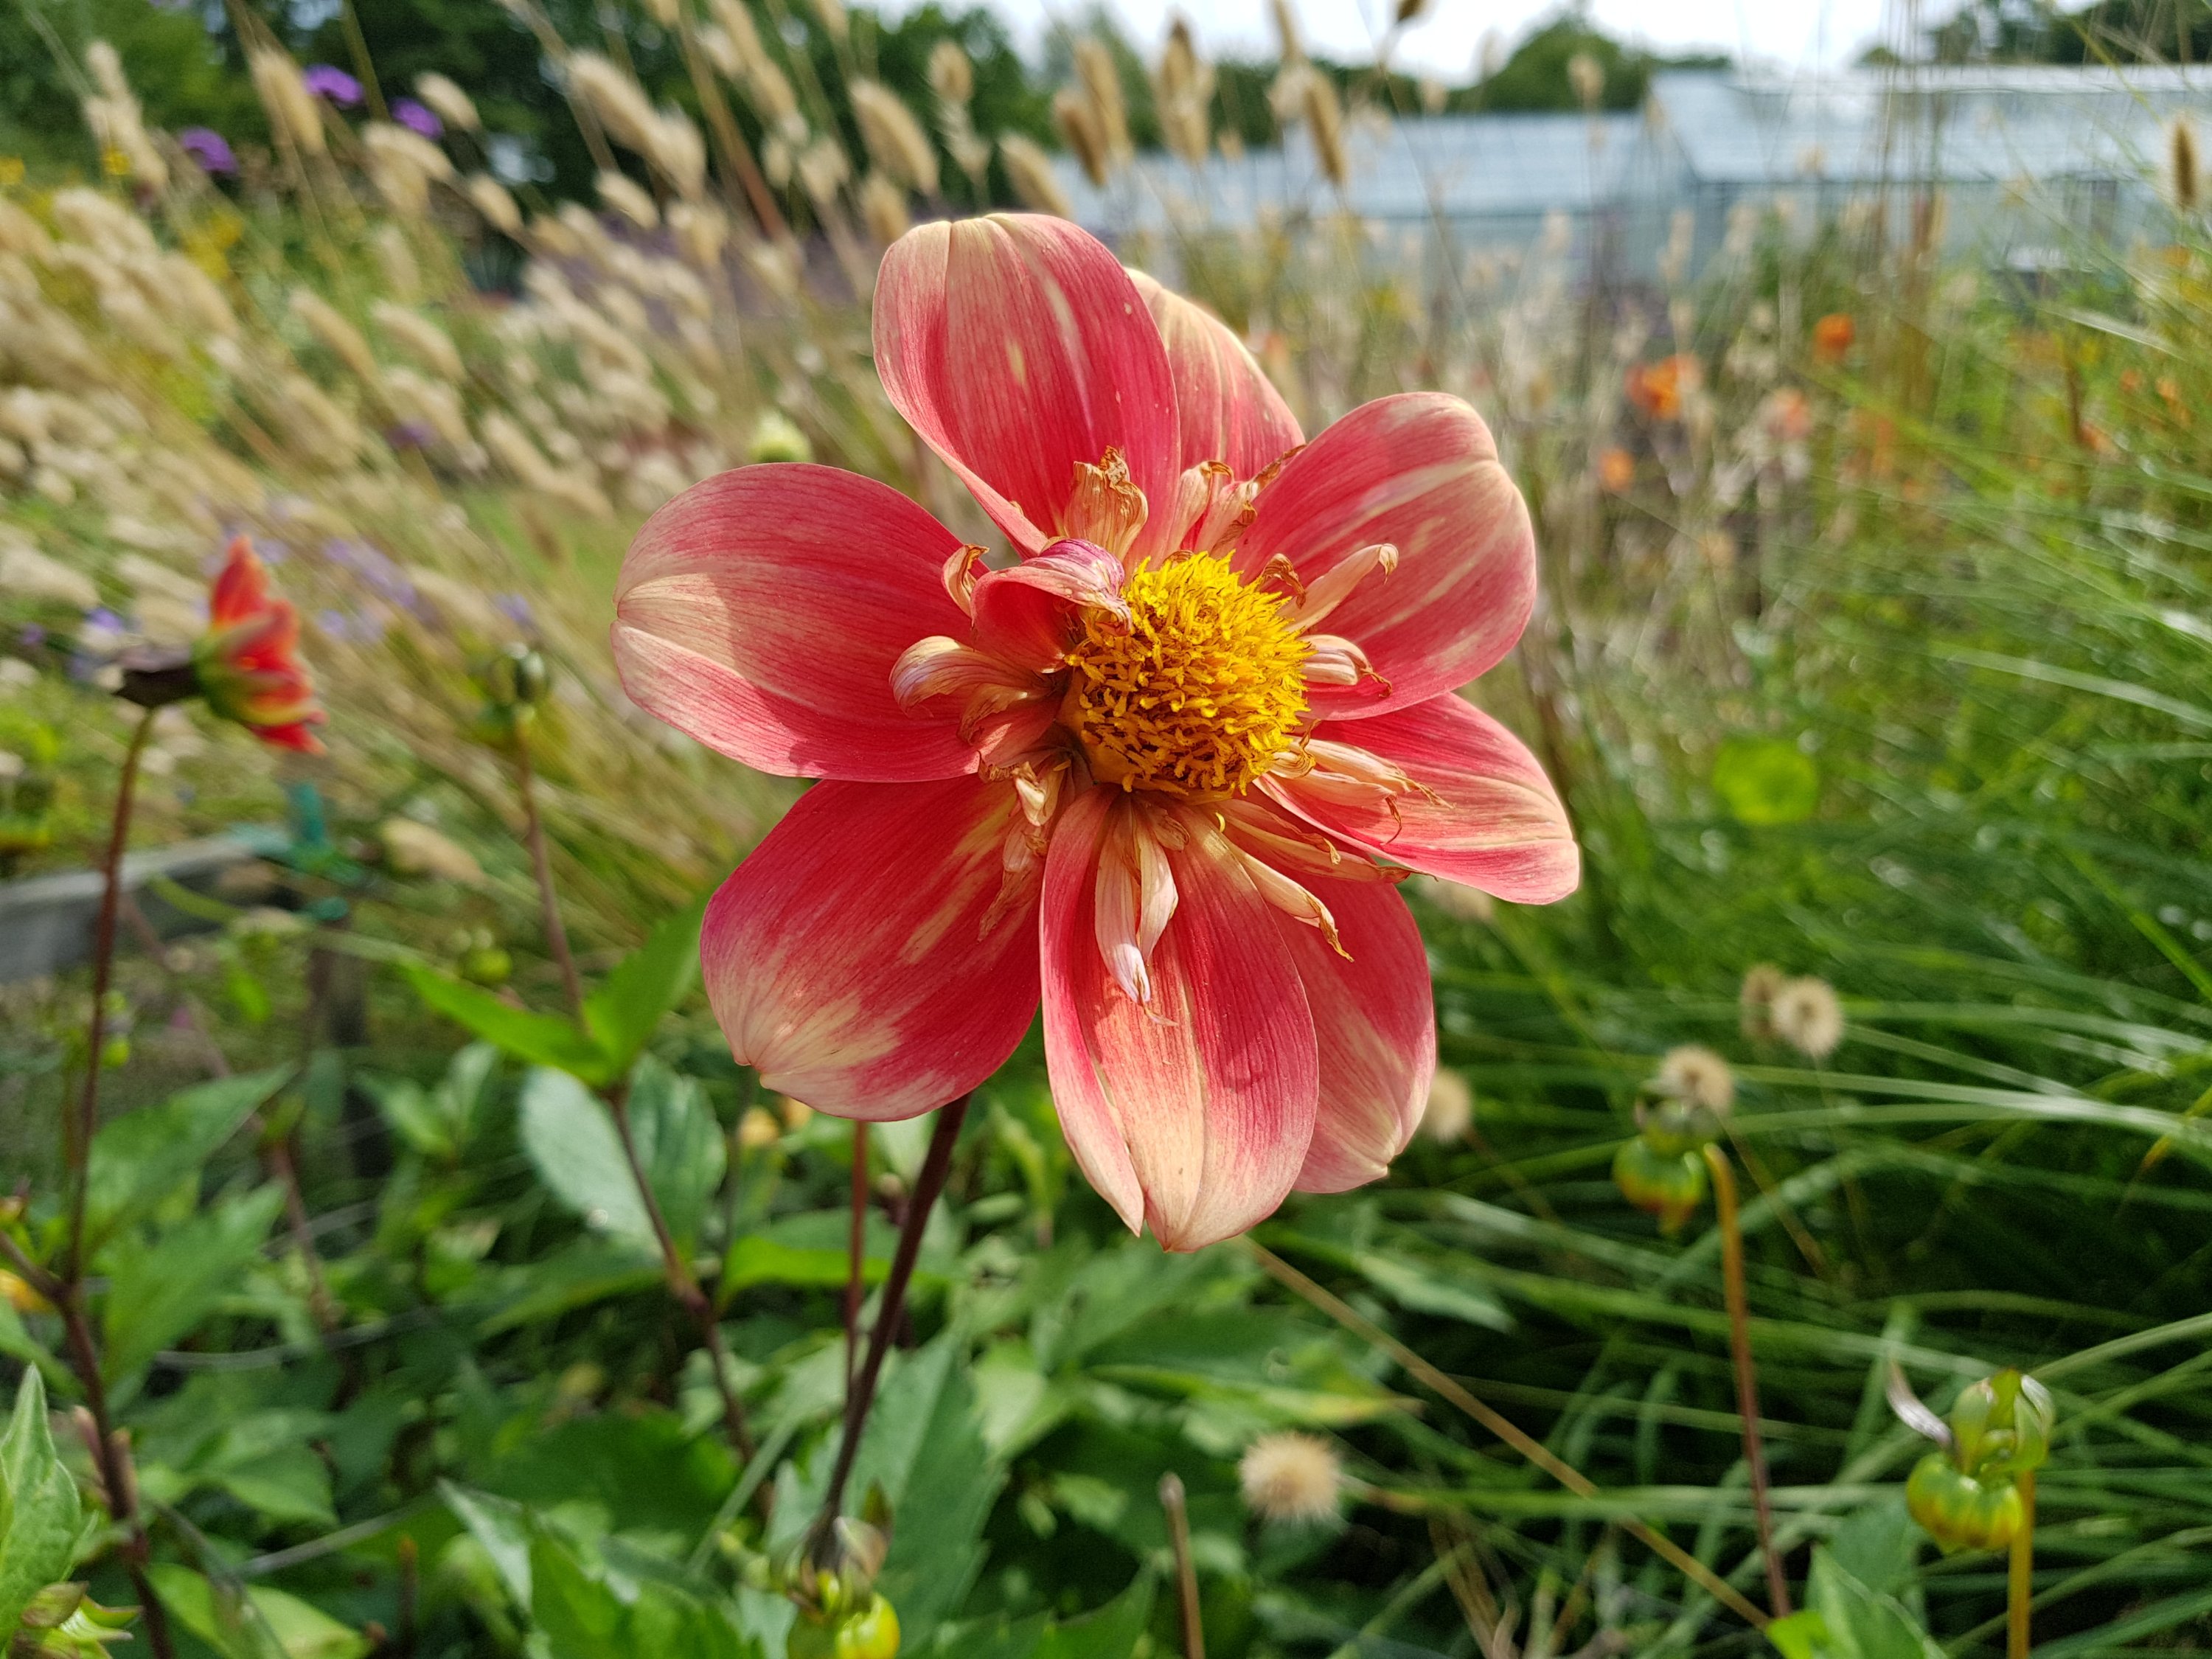 Celebration Gardens, Dahlias, flowers, outdoors, get outside, nature, places to visit, Aylett Nurseries, Hertfordshire, Living Life Our Way